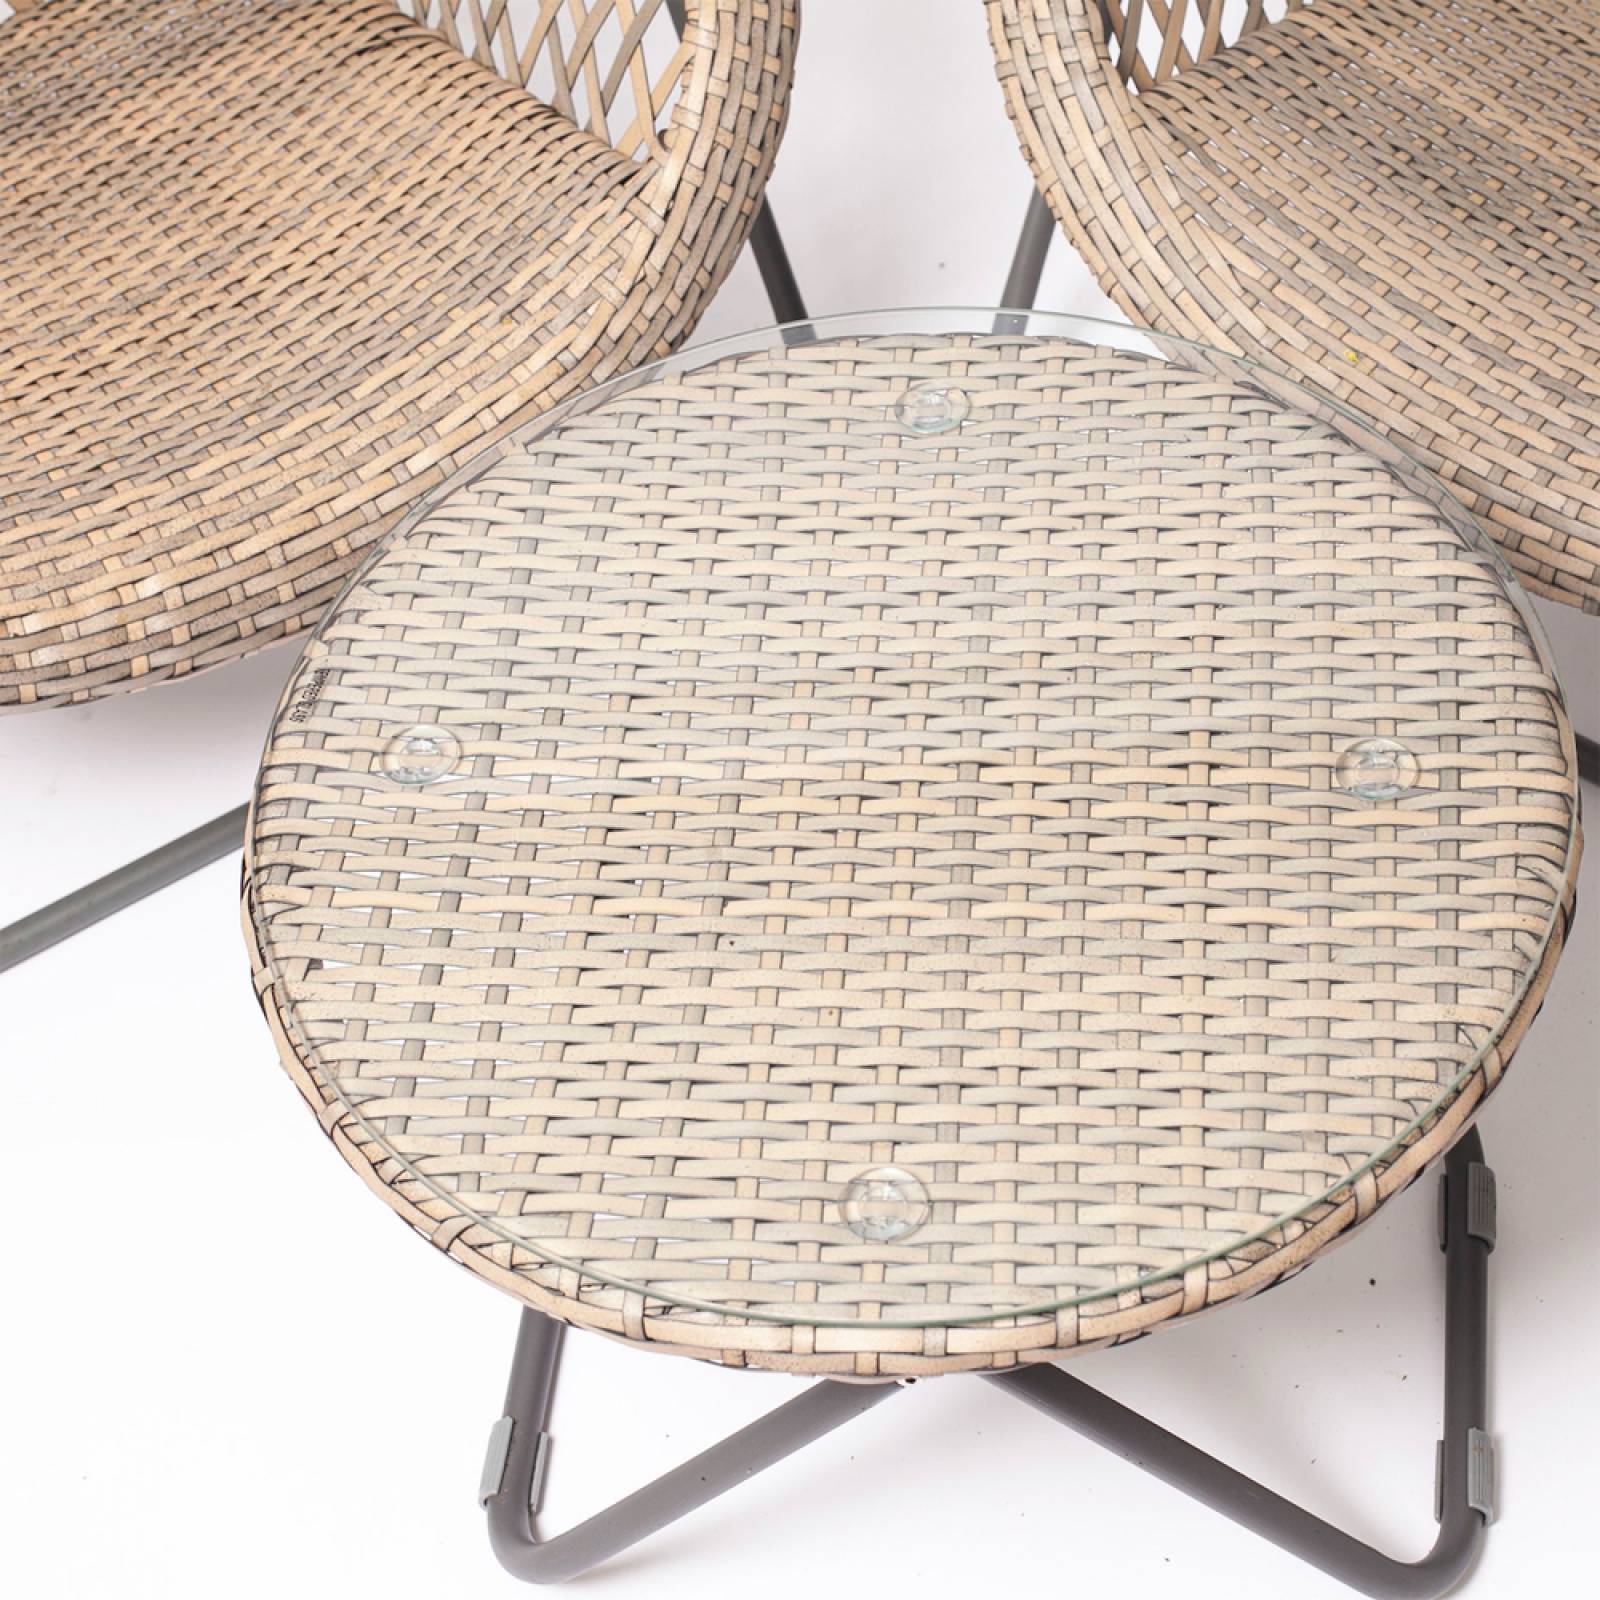 Rattan Chairs and Table Lounge Set thumbnails